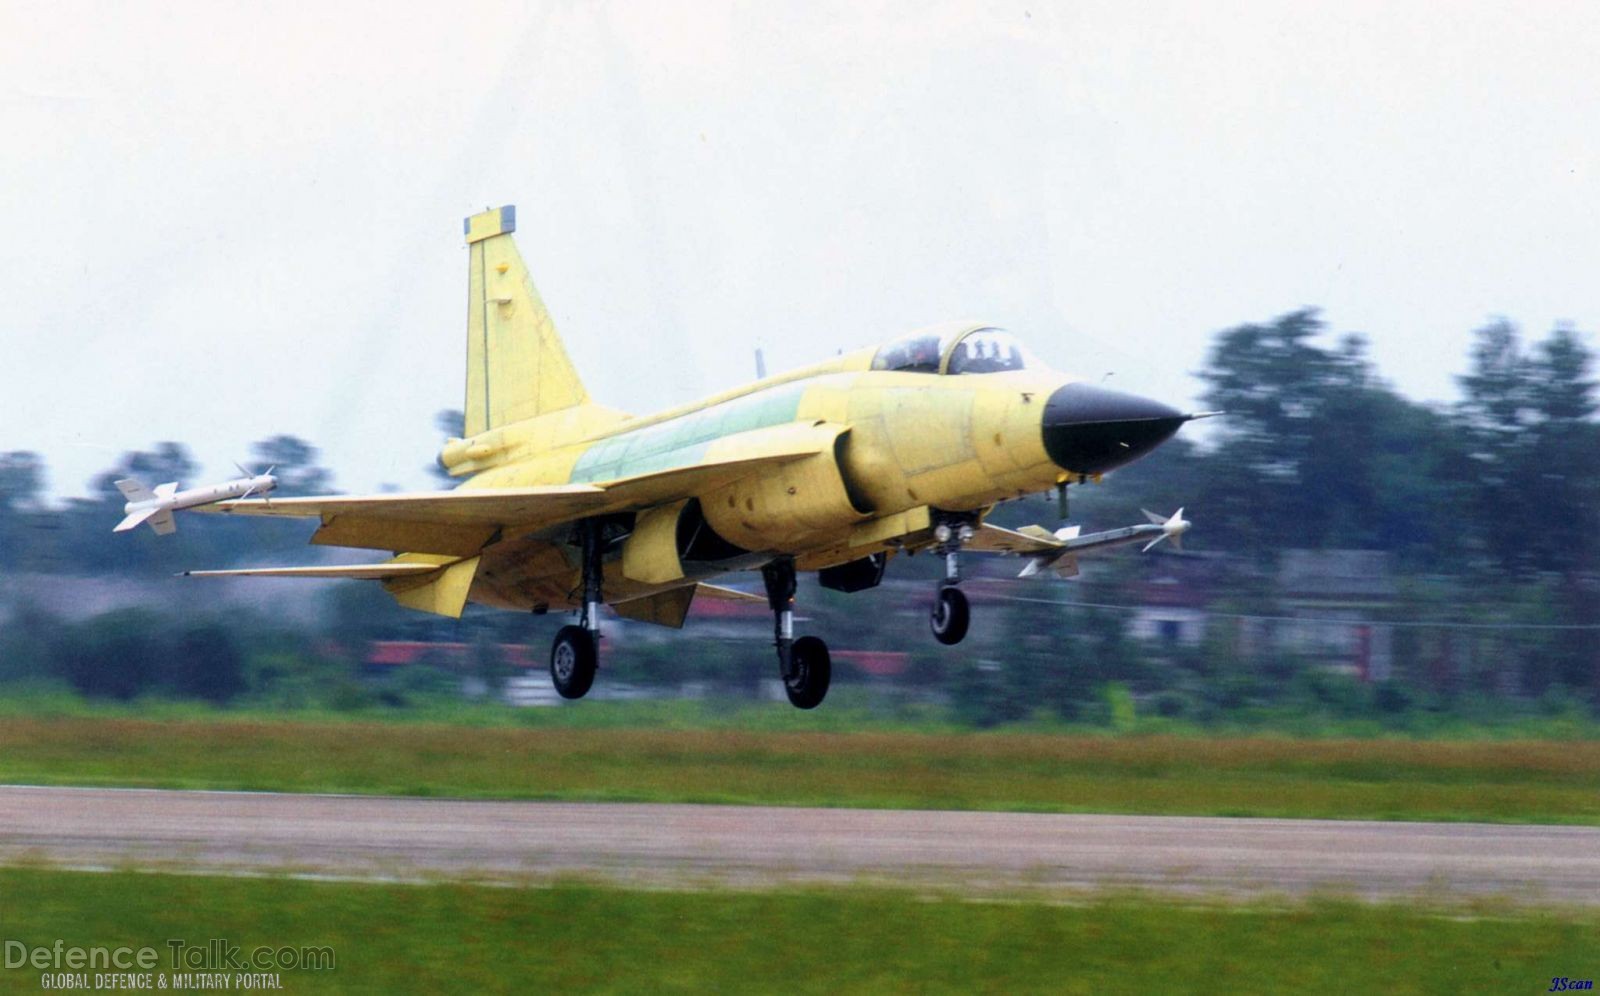 FC-1/JF-17 Xiaolong - People's Liberation Army Air Force